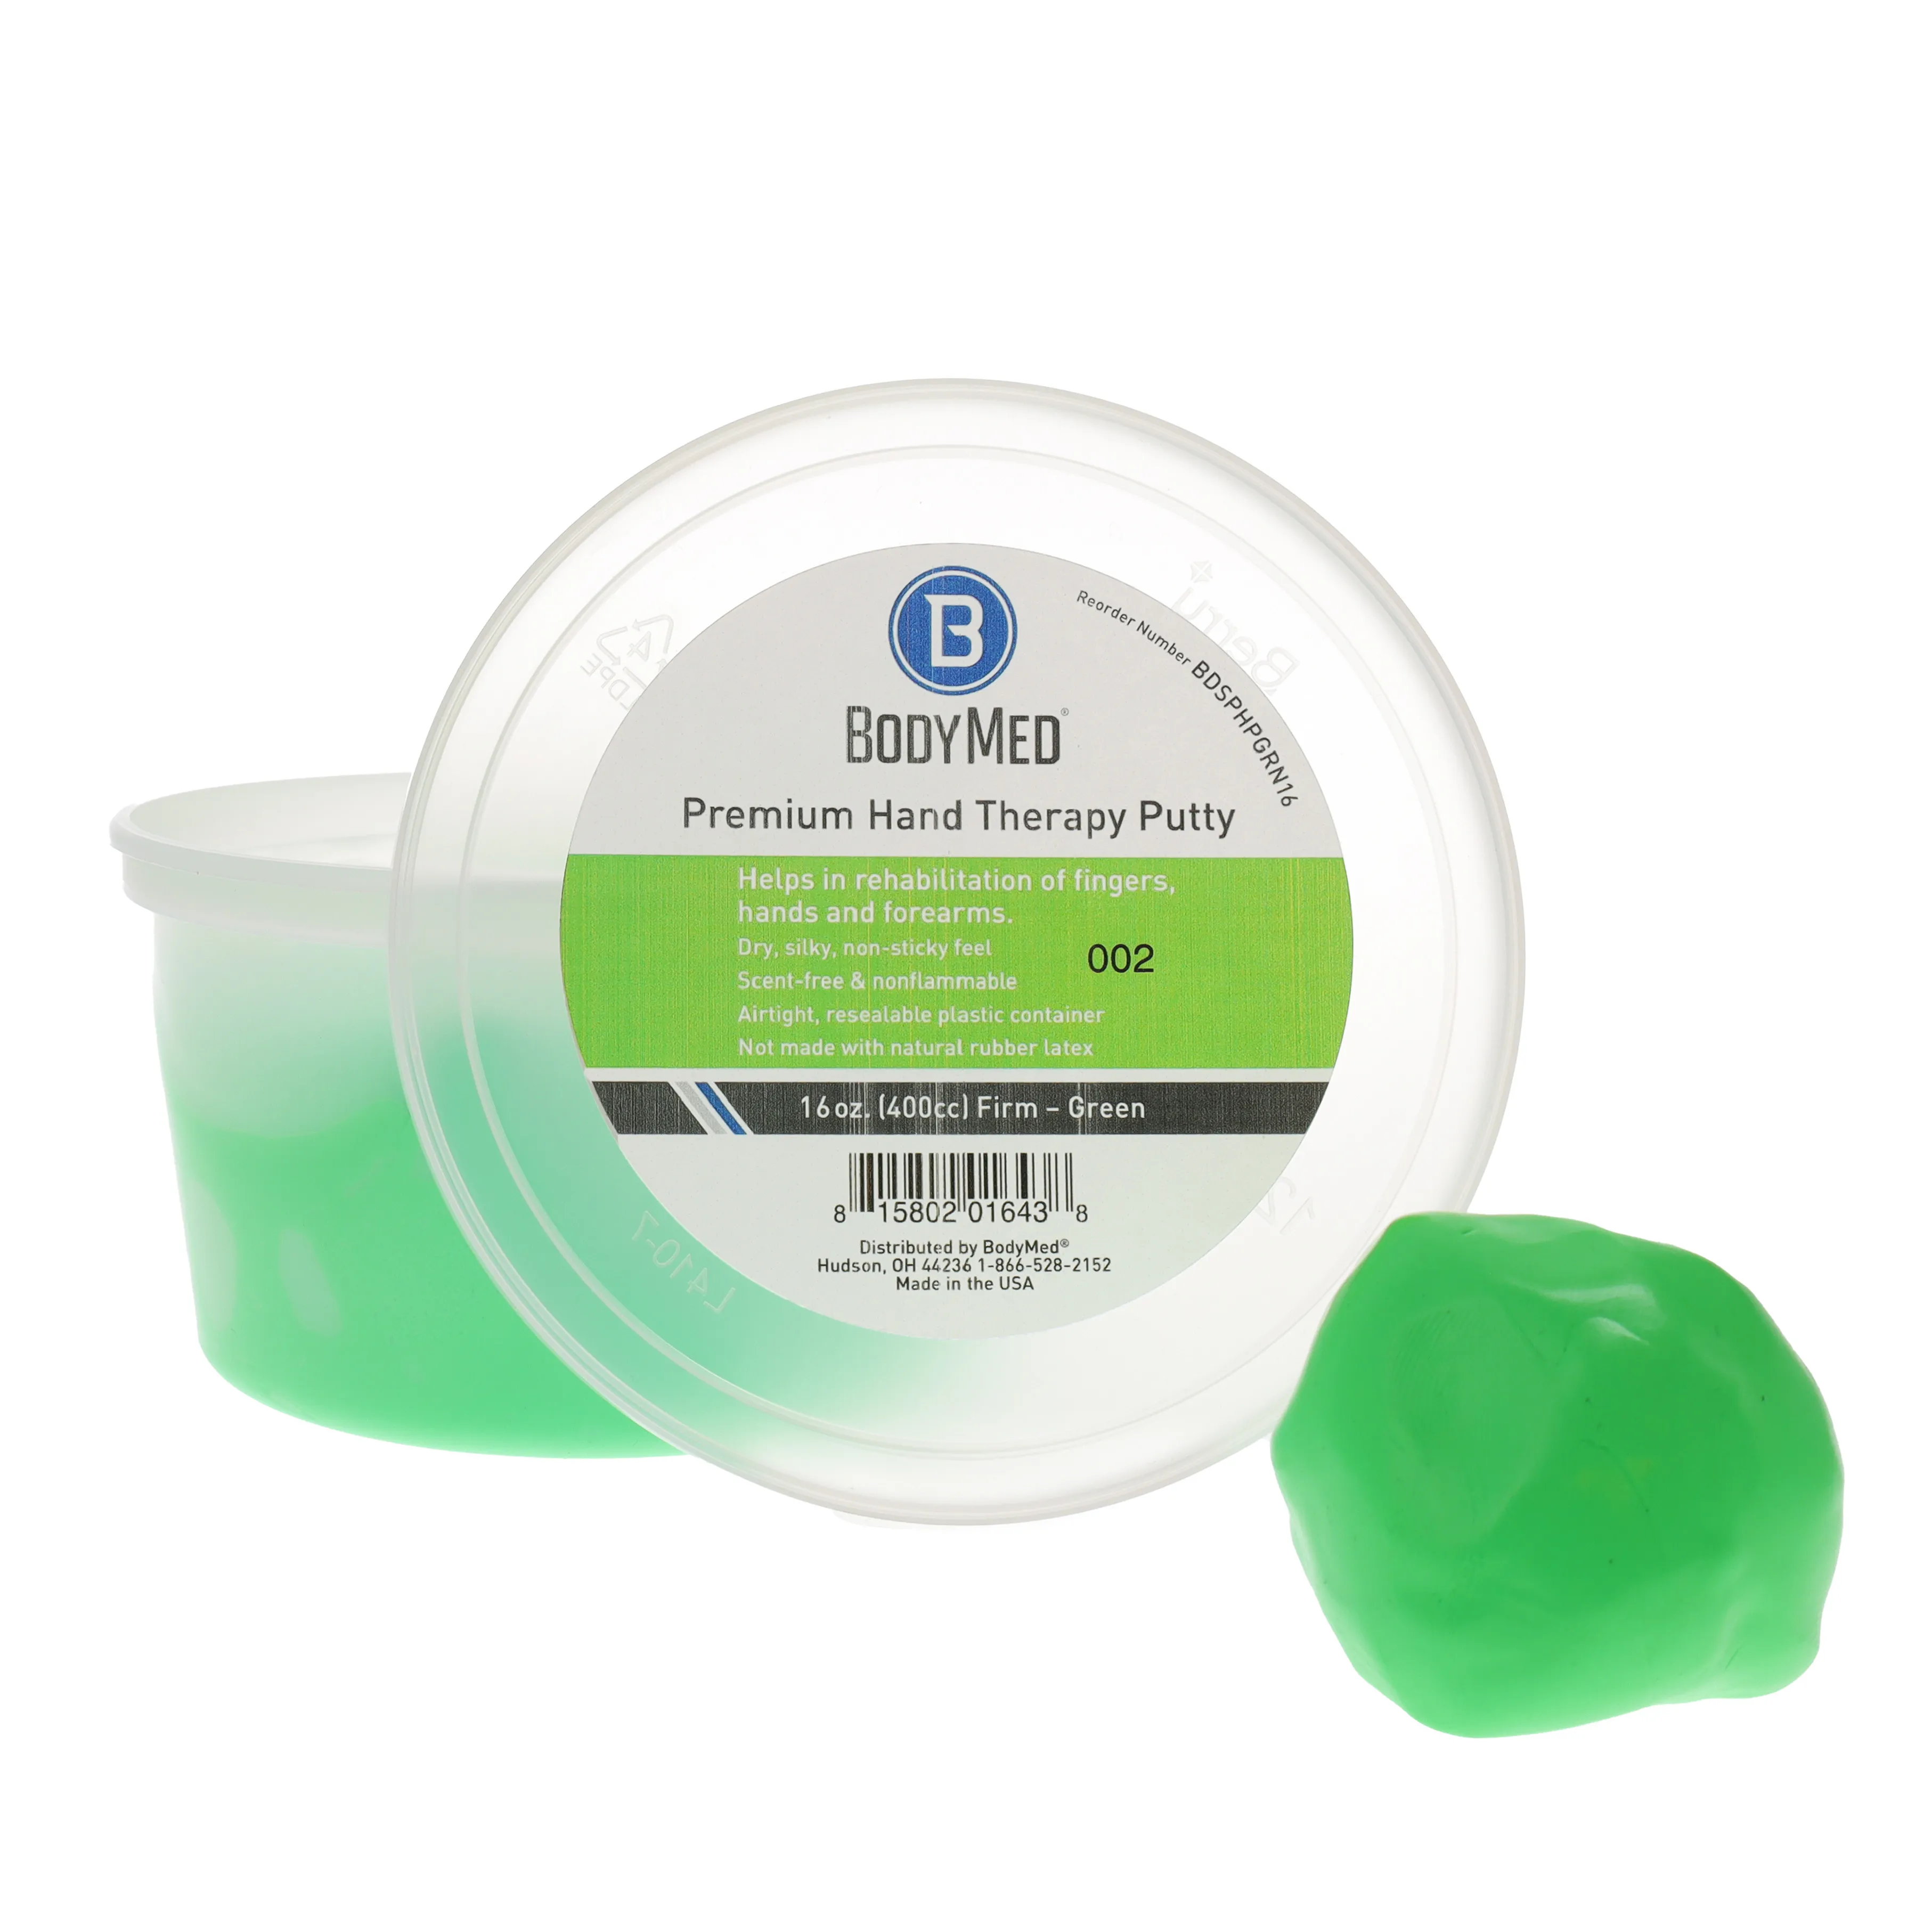 Bodymed - BDSPHPGRN16 - Premium Hand Therapy Putty - Firm